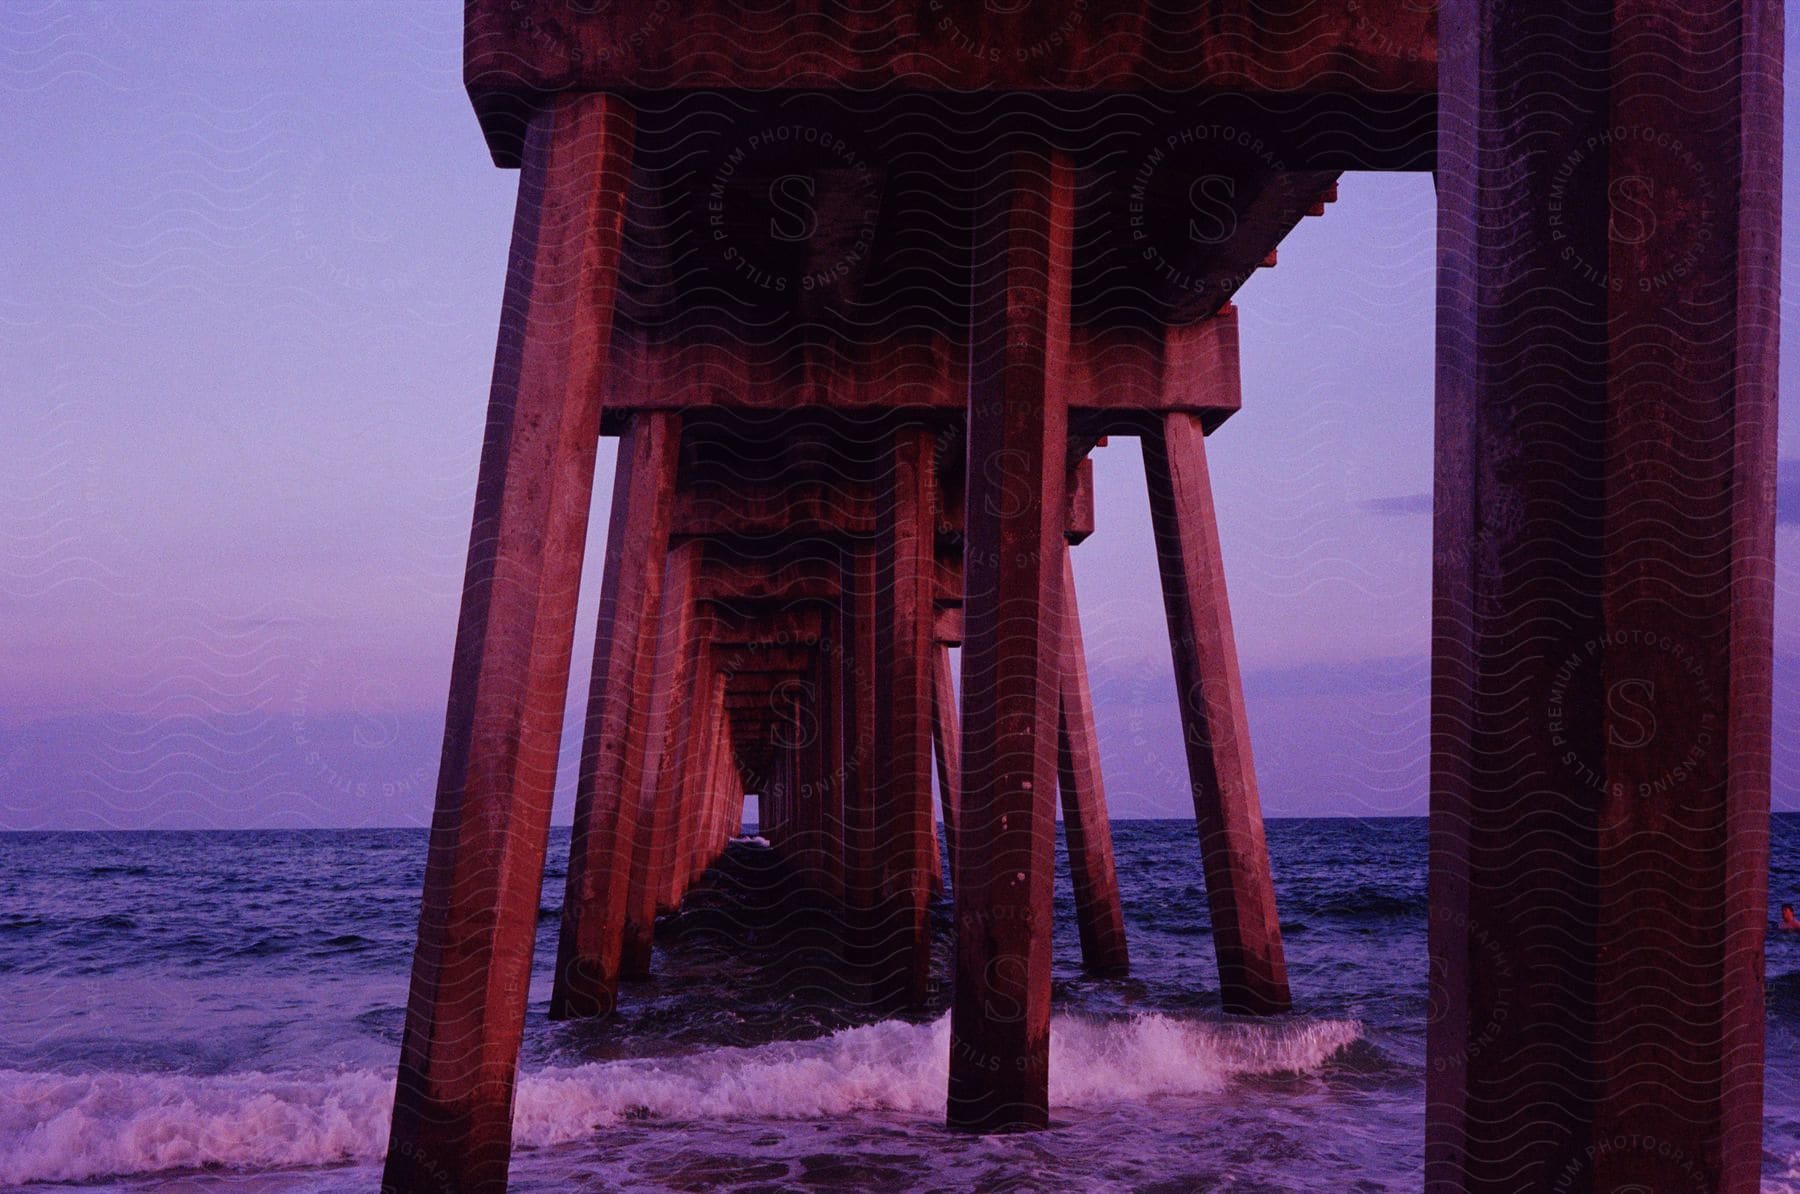 A section of a pier from the bottom, to focus itself